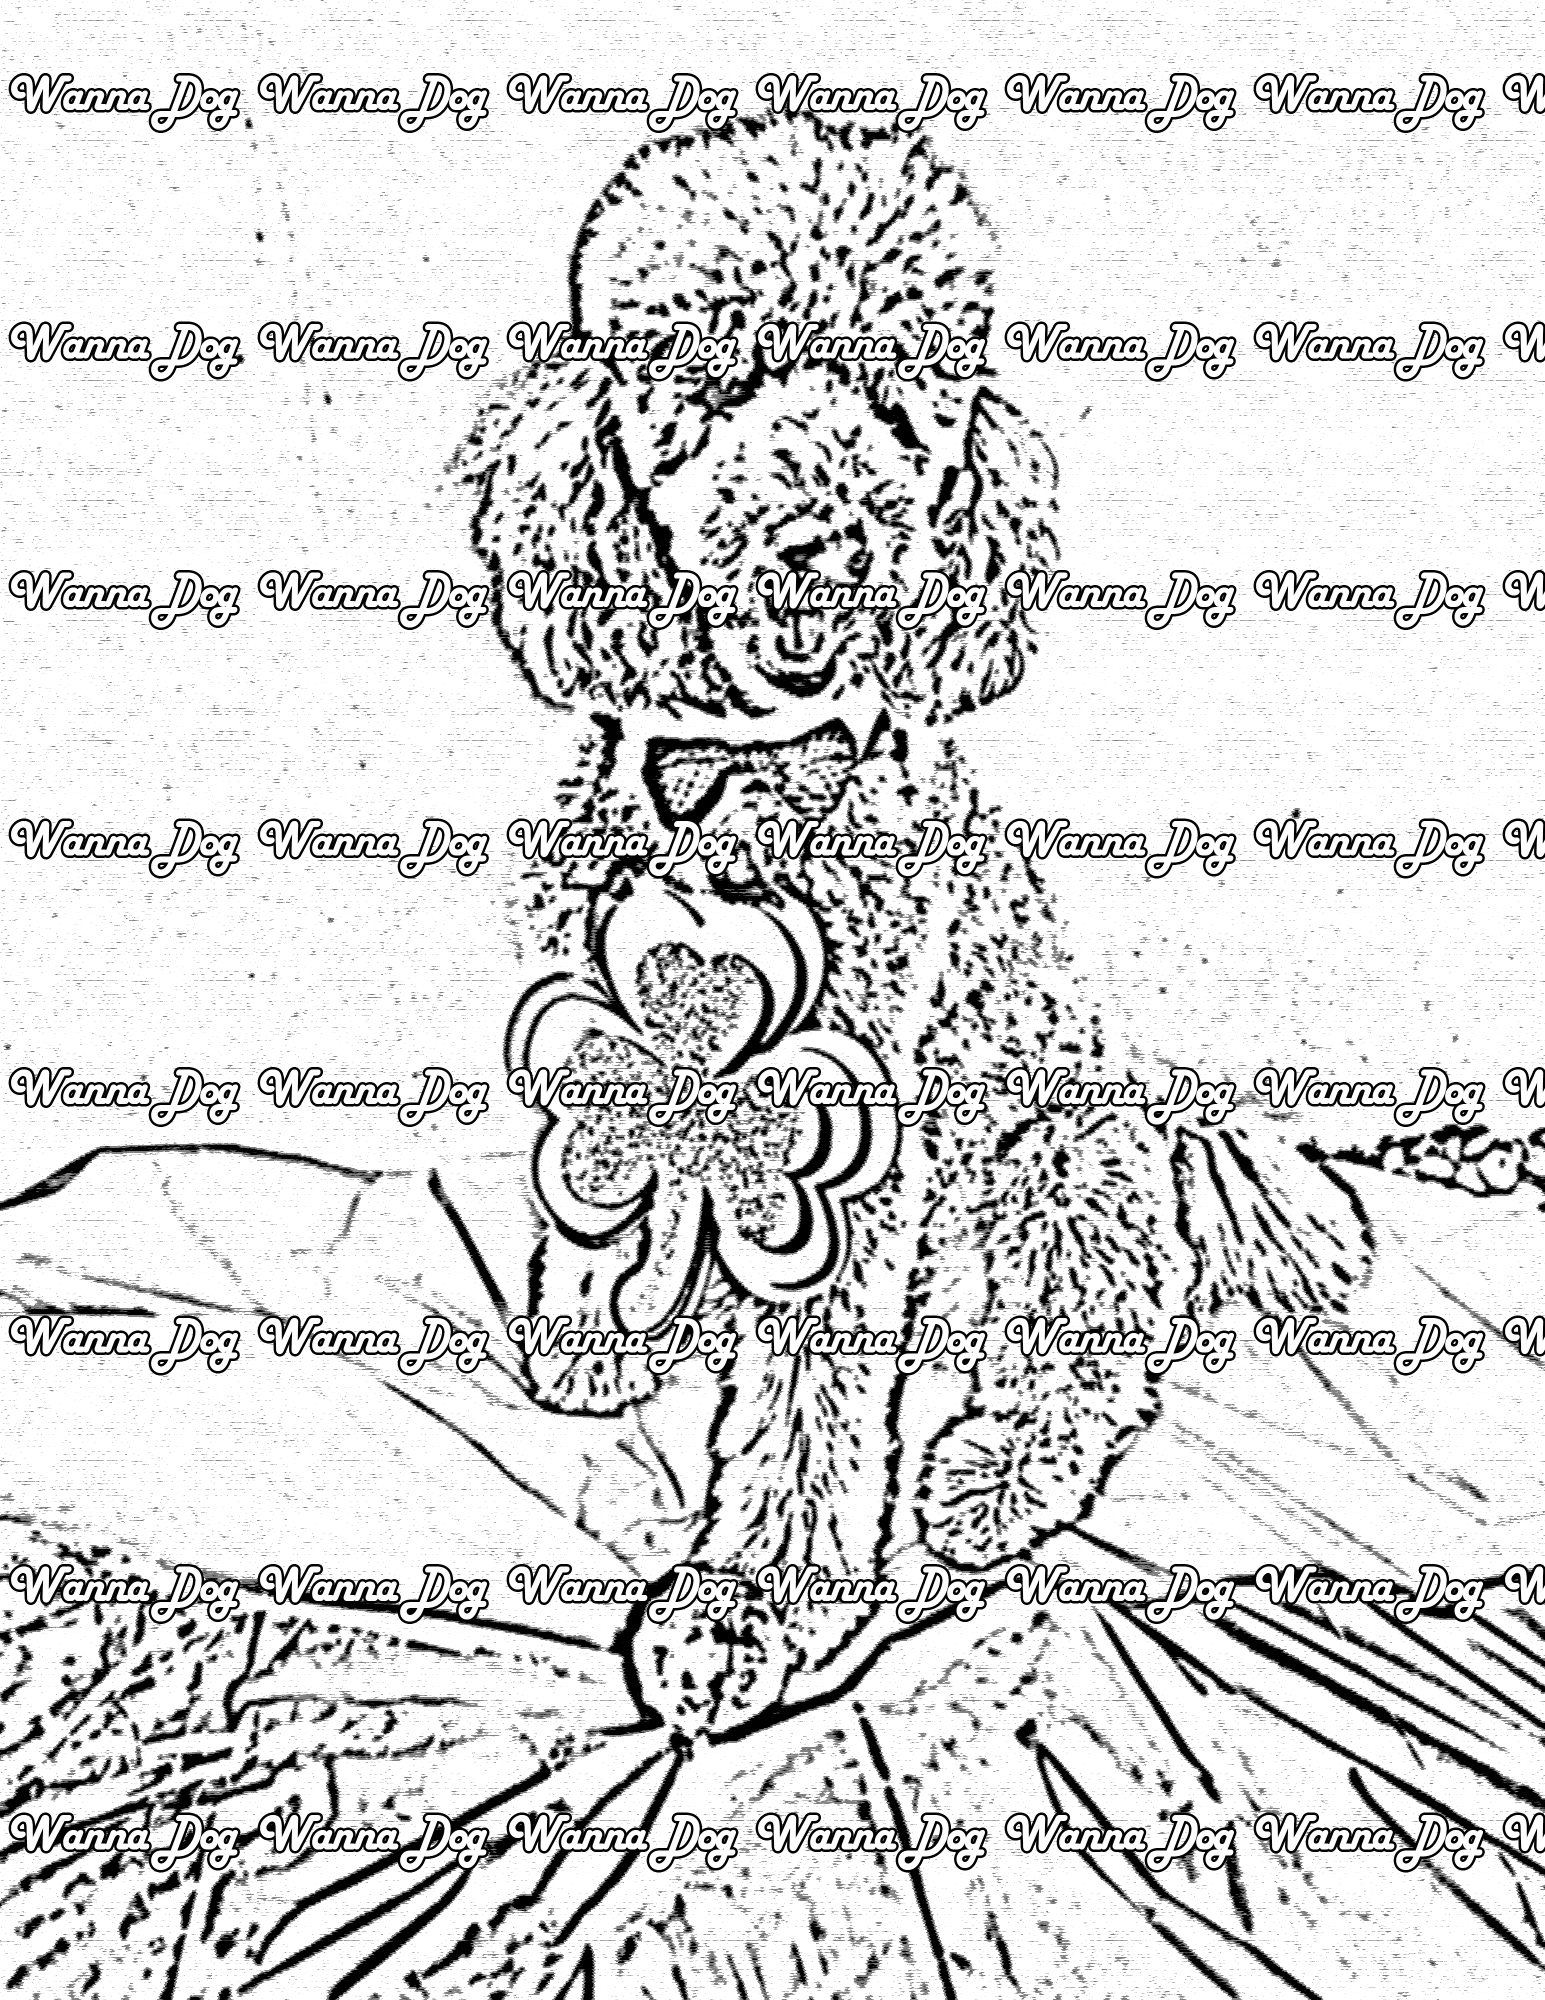 Poodle Coloring Page of a Poodle wearing a shamrock necklace